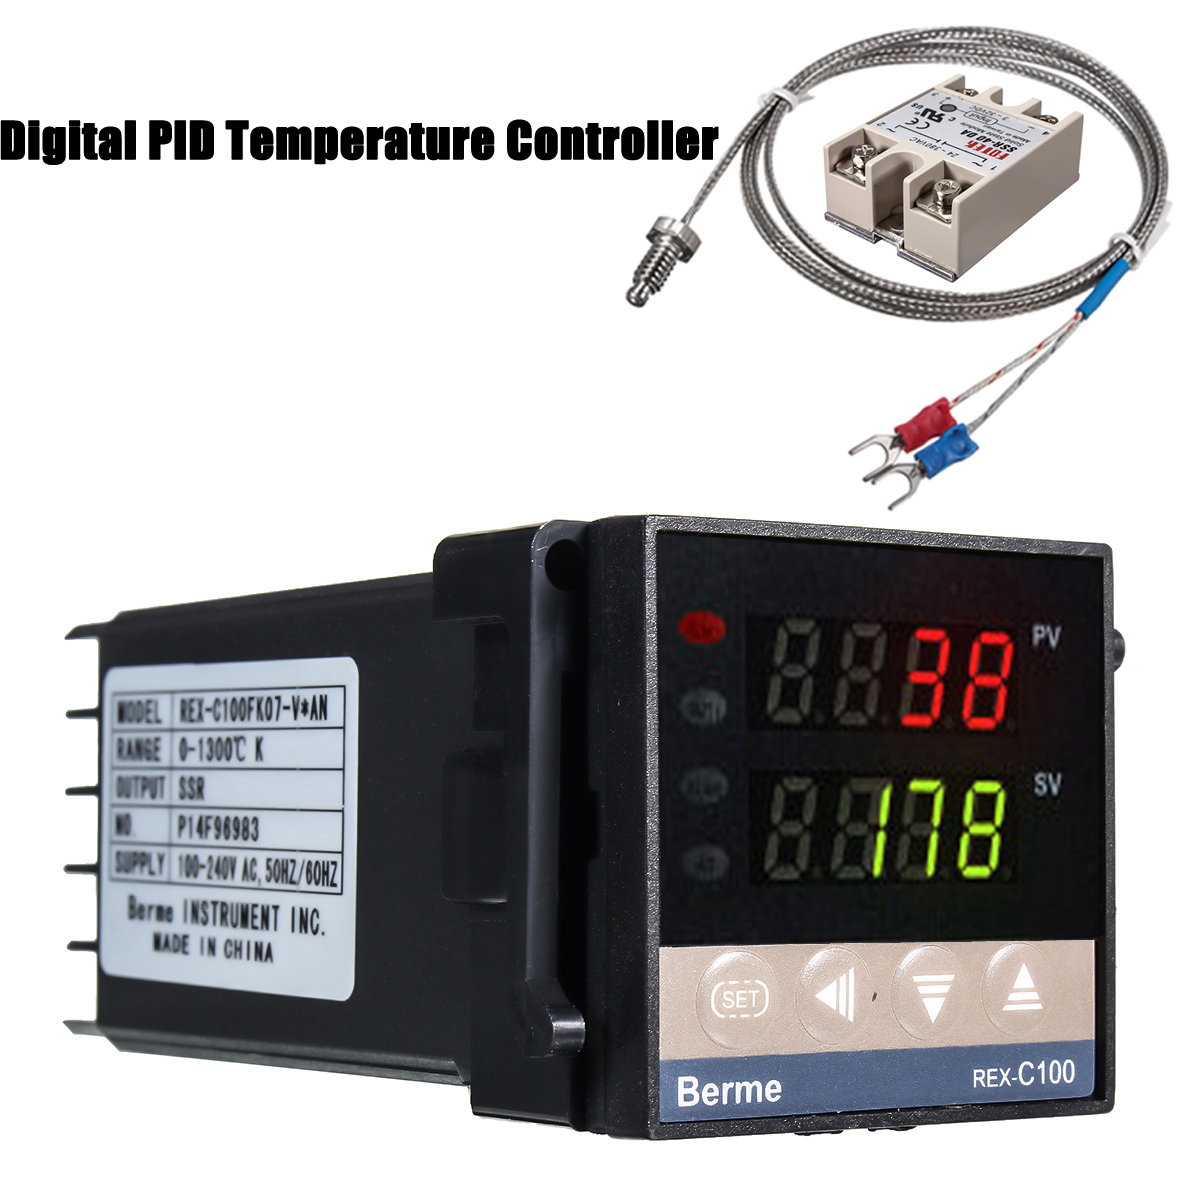 110-240V-01300-REX-C100-Digital-PID-Temperature-Controller-Kit-Alarm-Function-With-Probe-Relay-1351235-6